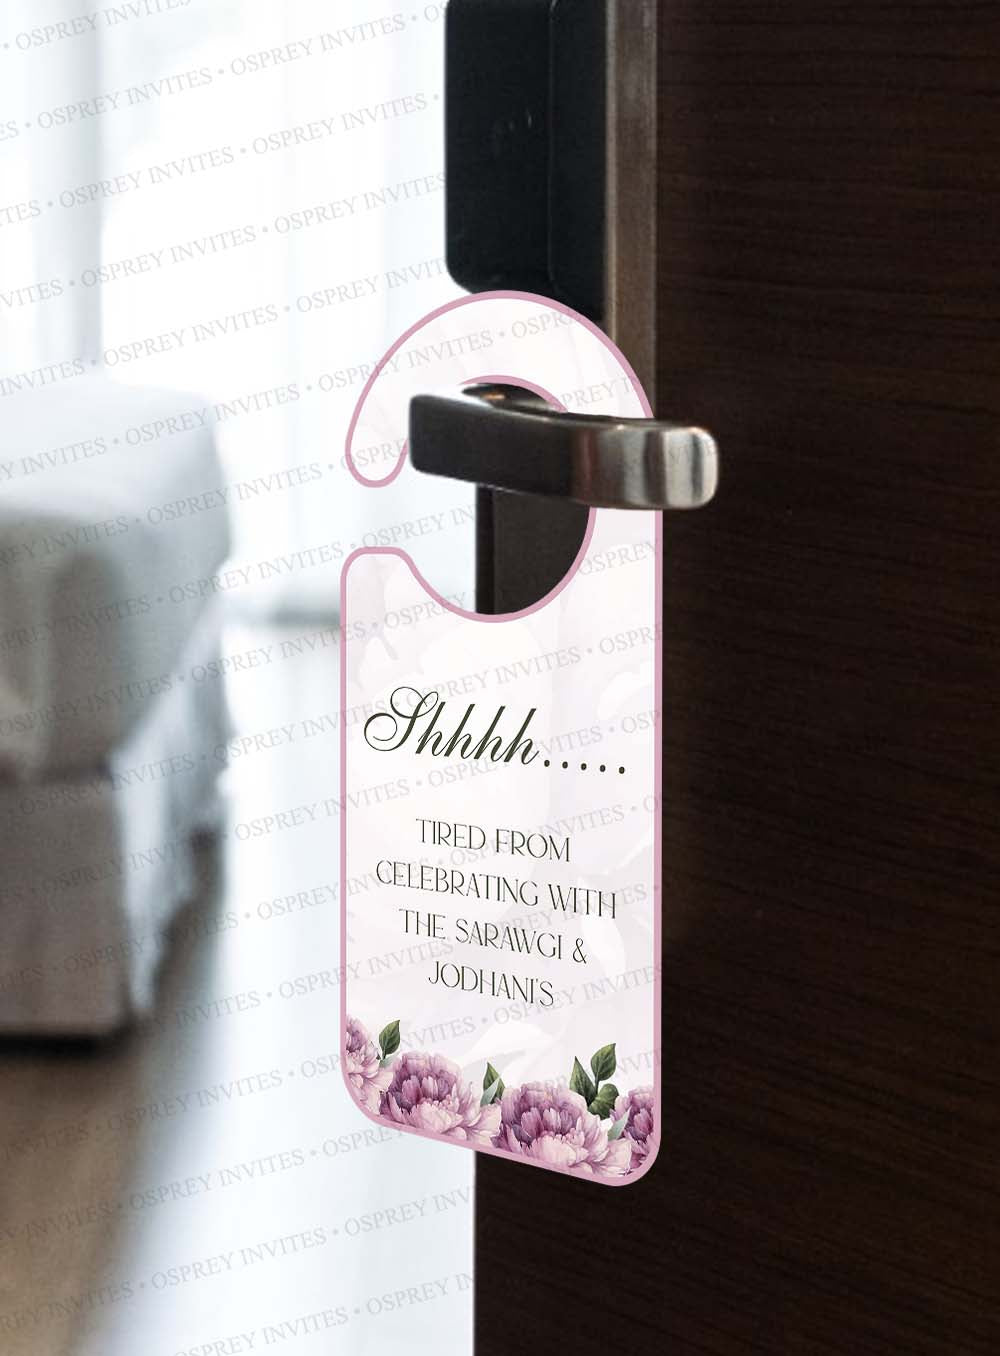 Pink roses and white lily theme Door Knob Hanging decoration for Indian wedding stationery collection.